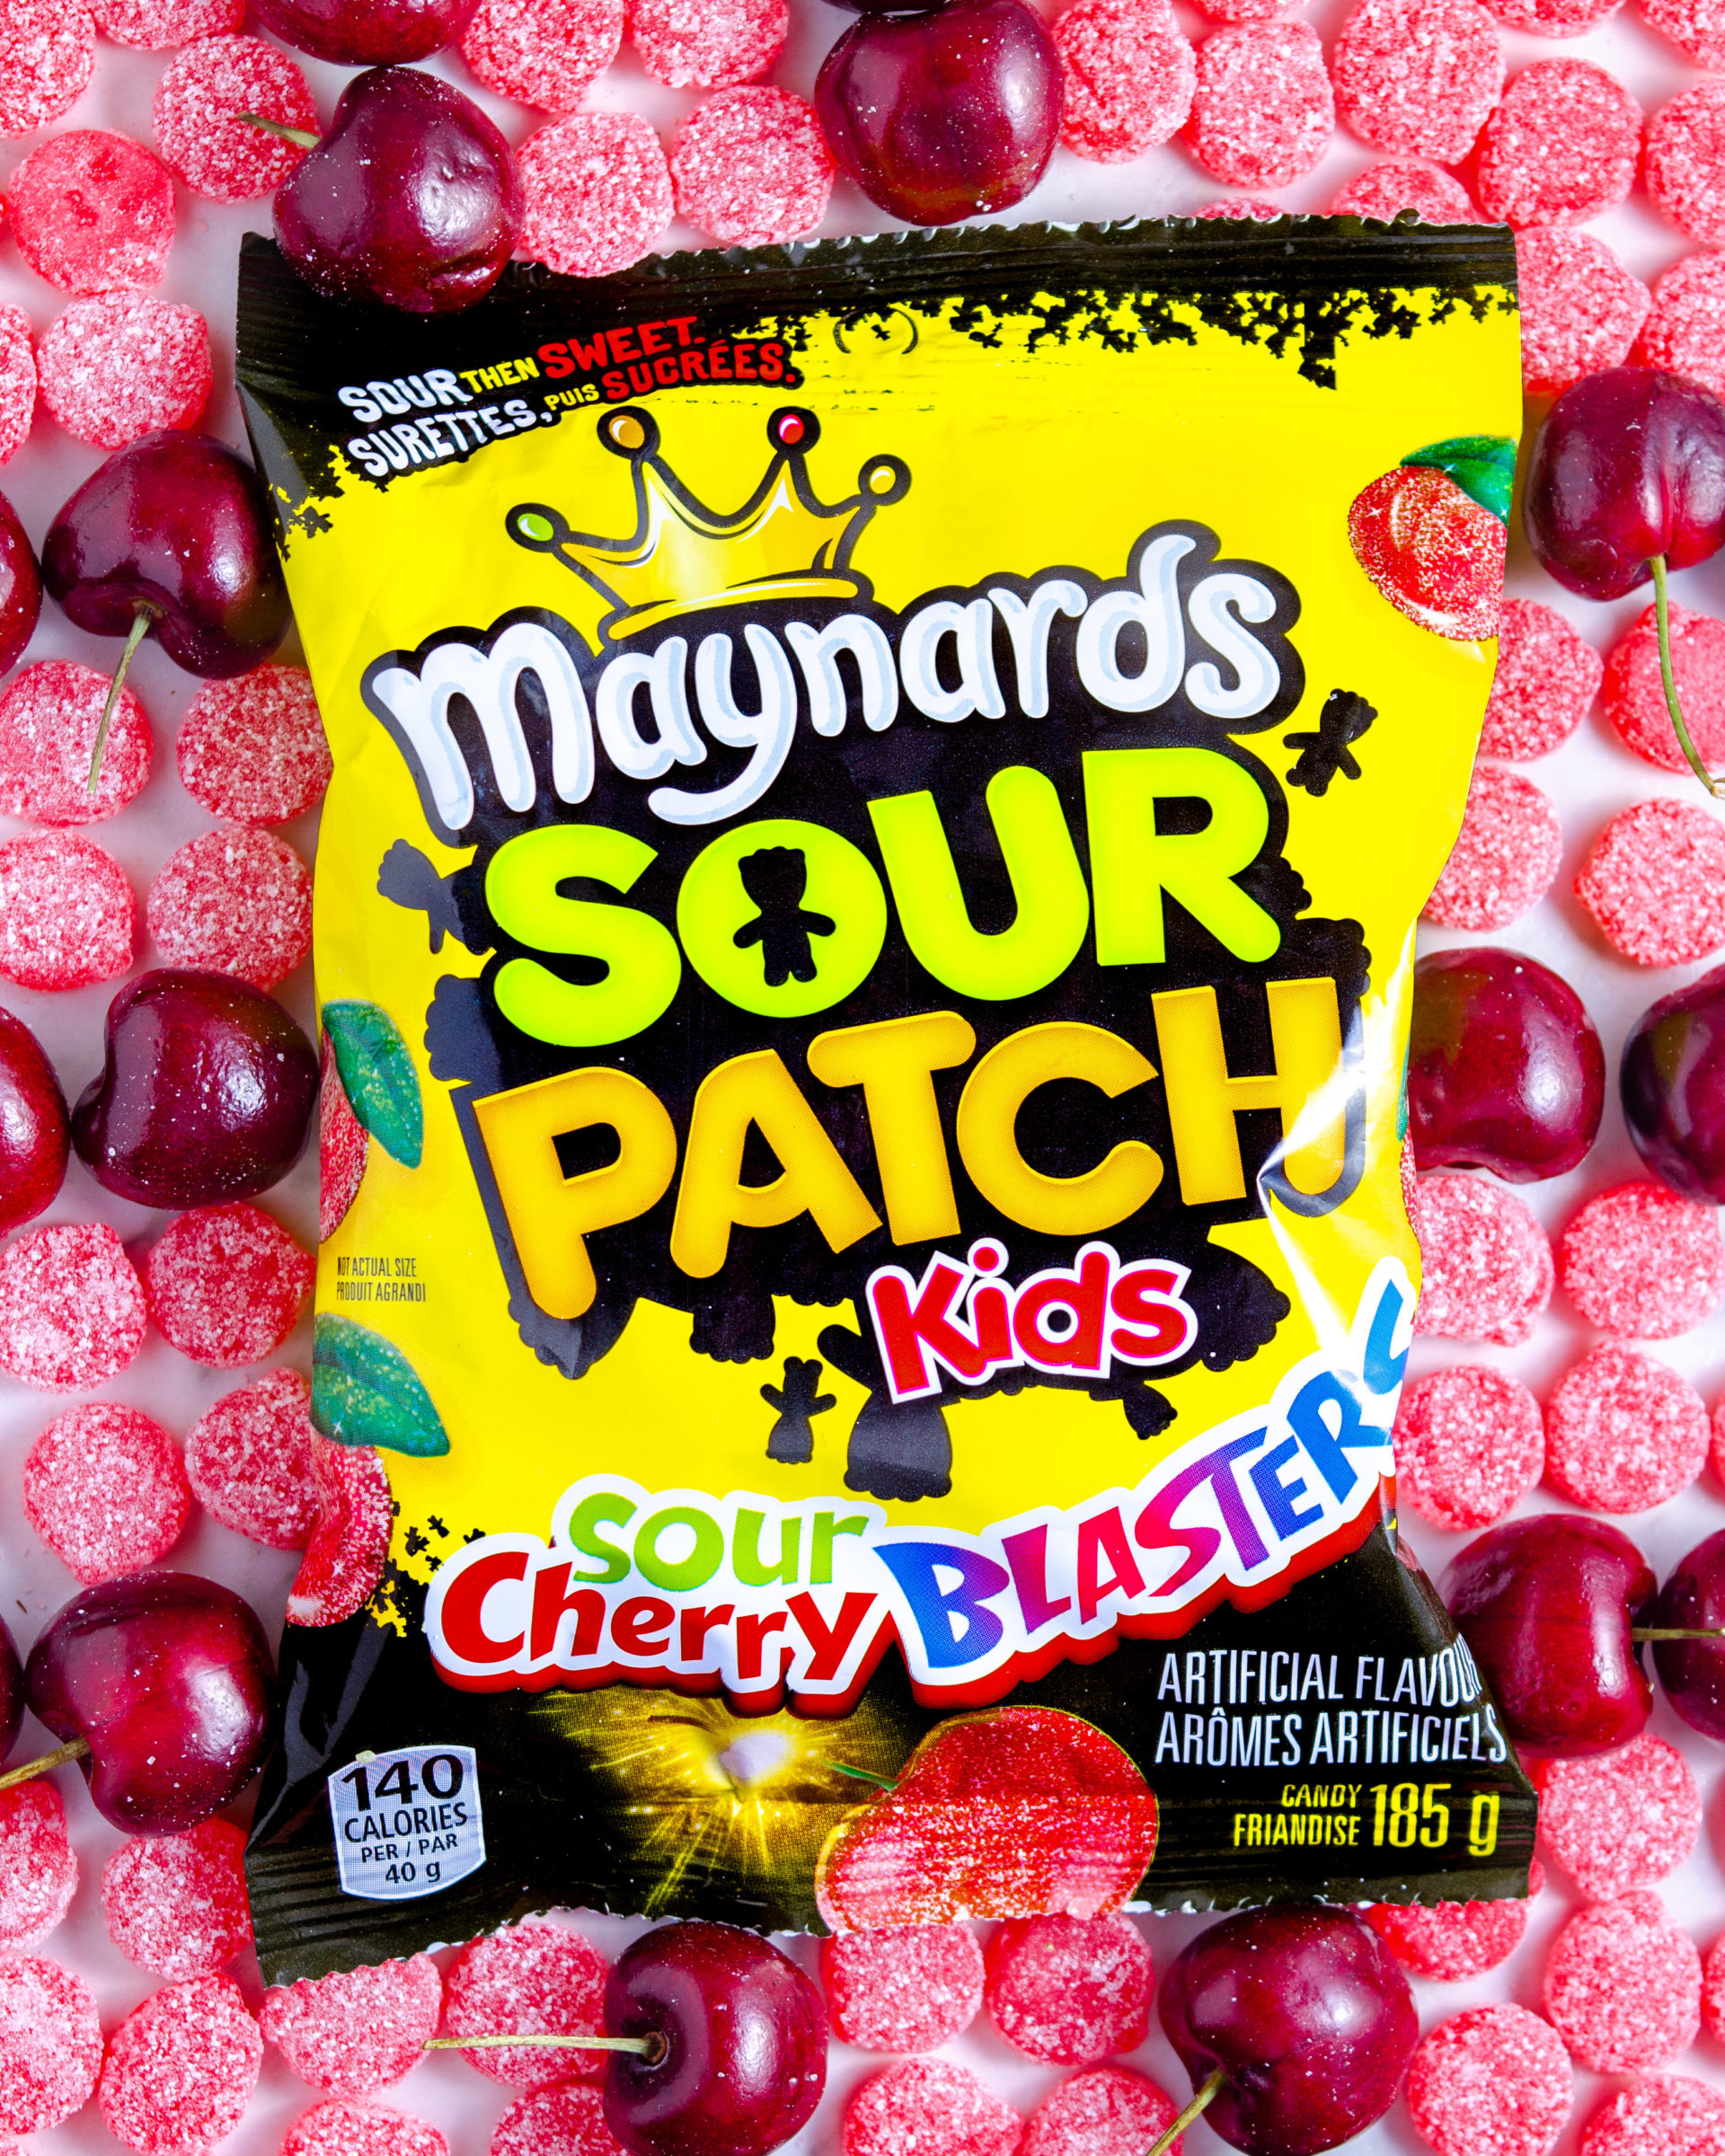 Sour Cherry blasters on a bed of candy and cherries - brand photography